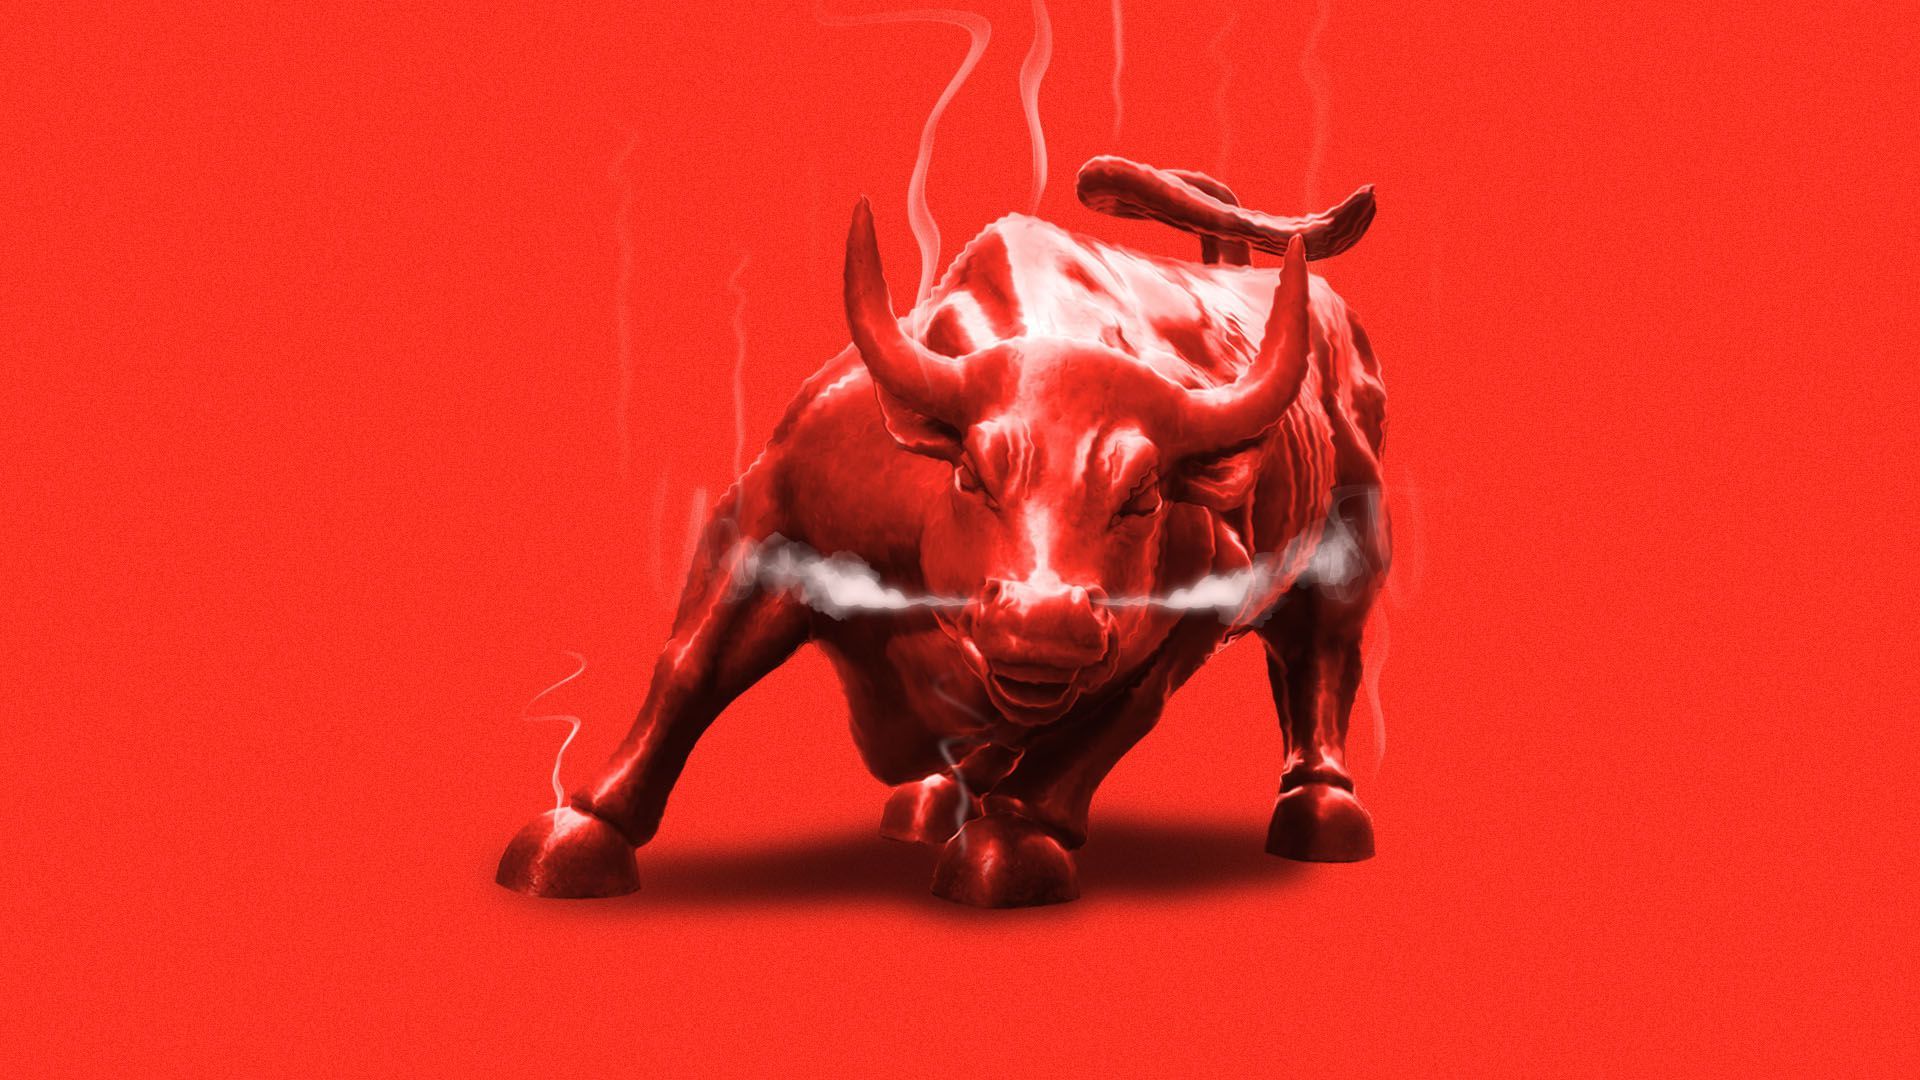 Illustration of the Wall Street bull with steam coming off of him.